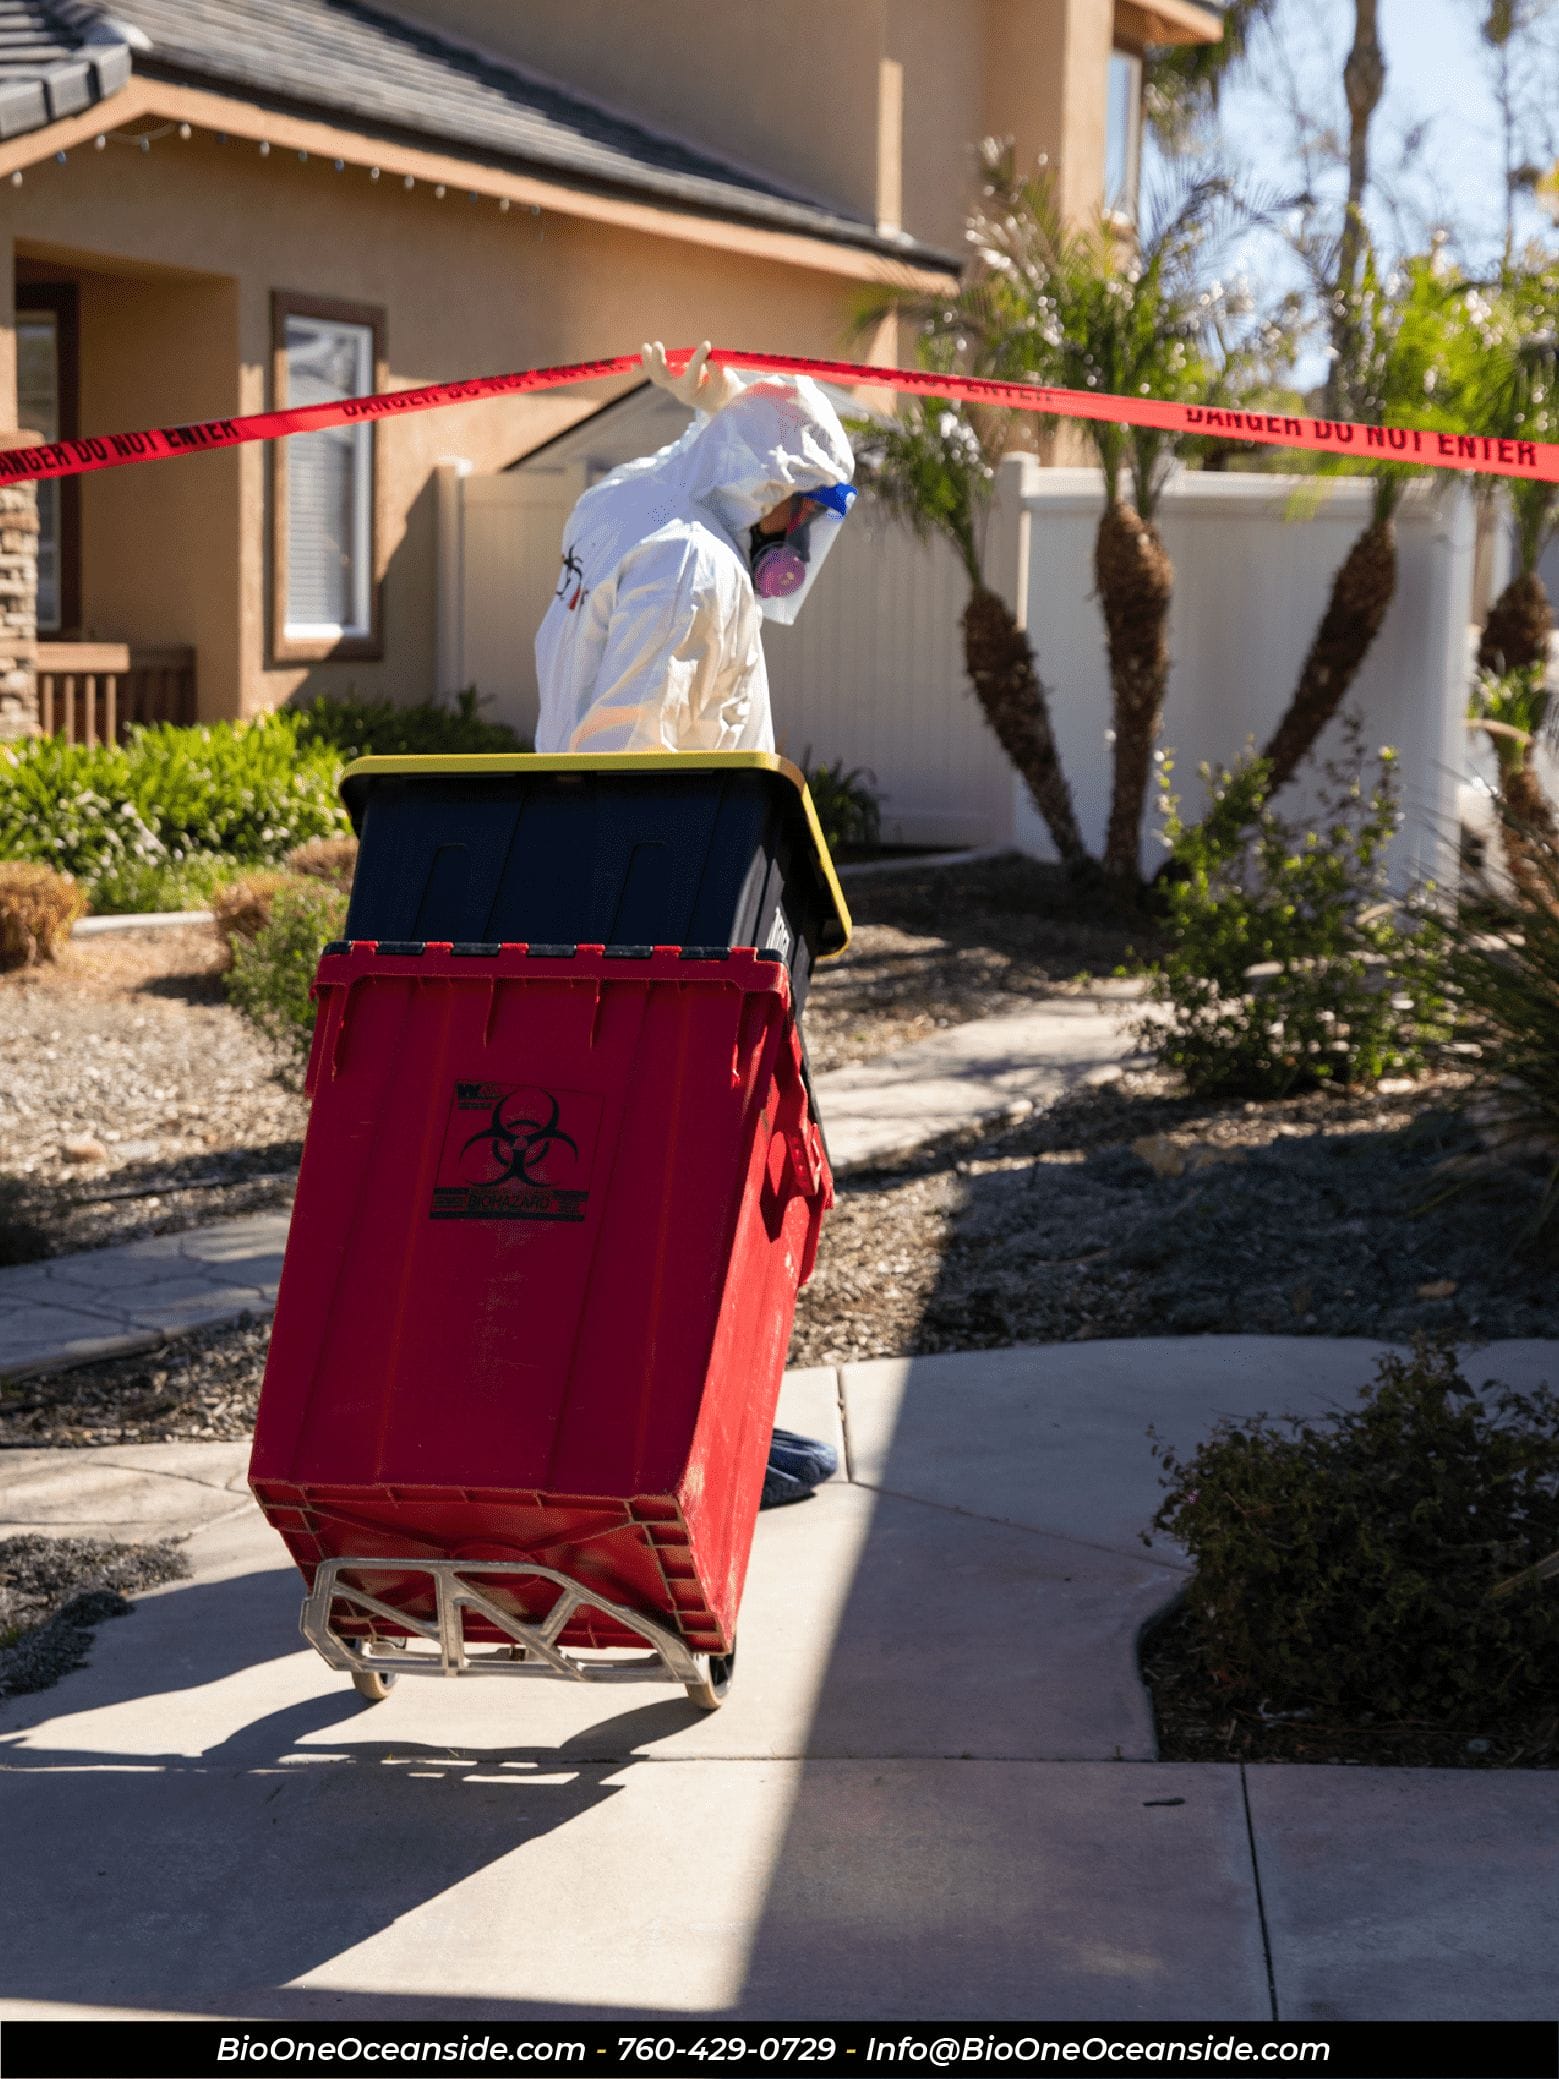 Image shows Bio-One technician entering a property with biohazard cleanup equipment.